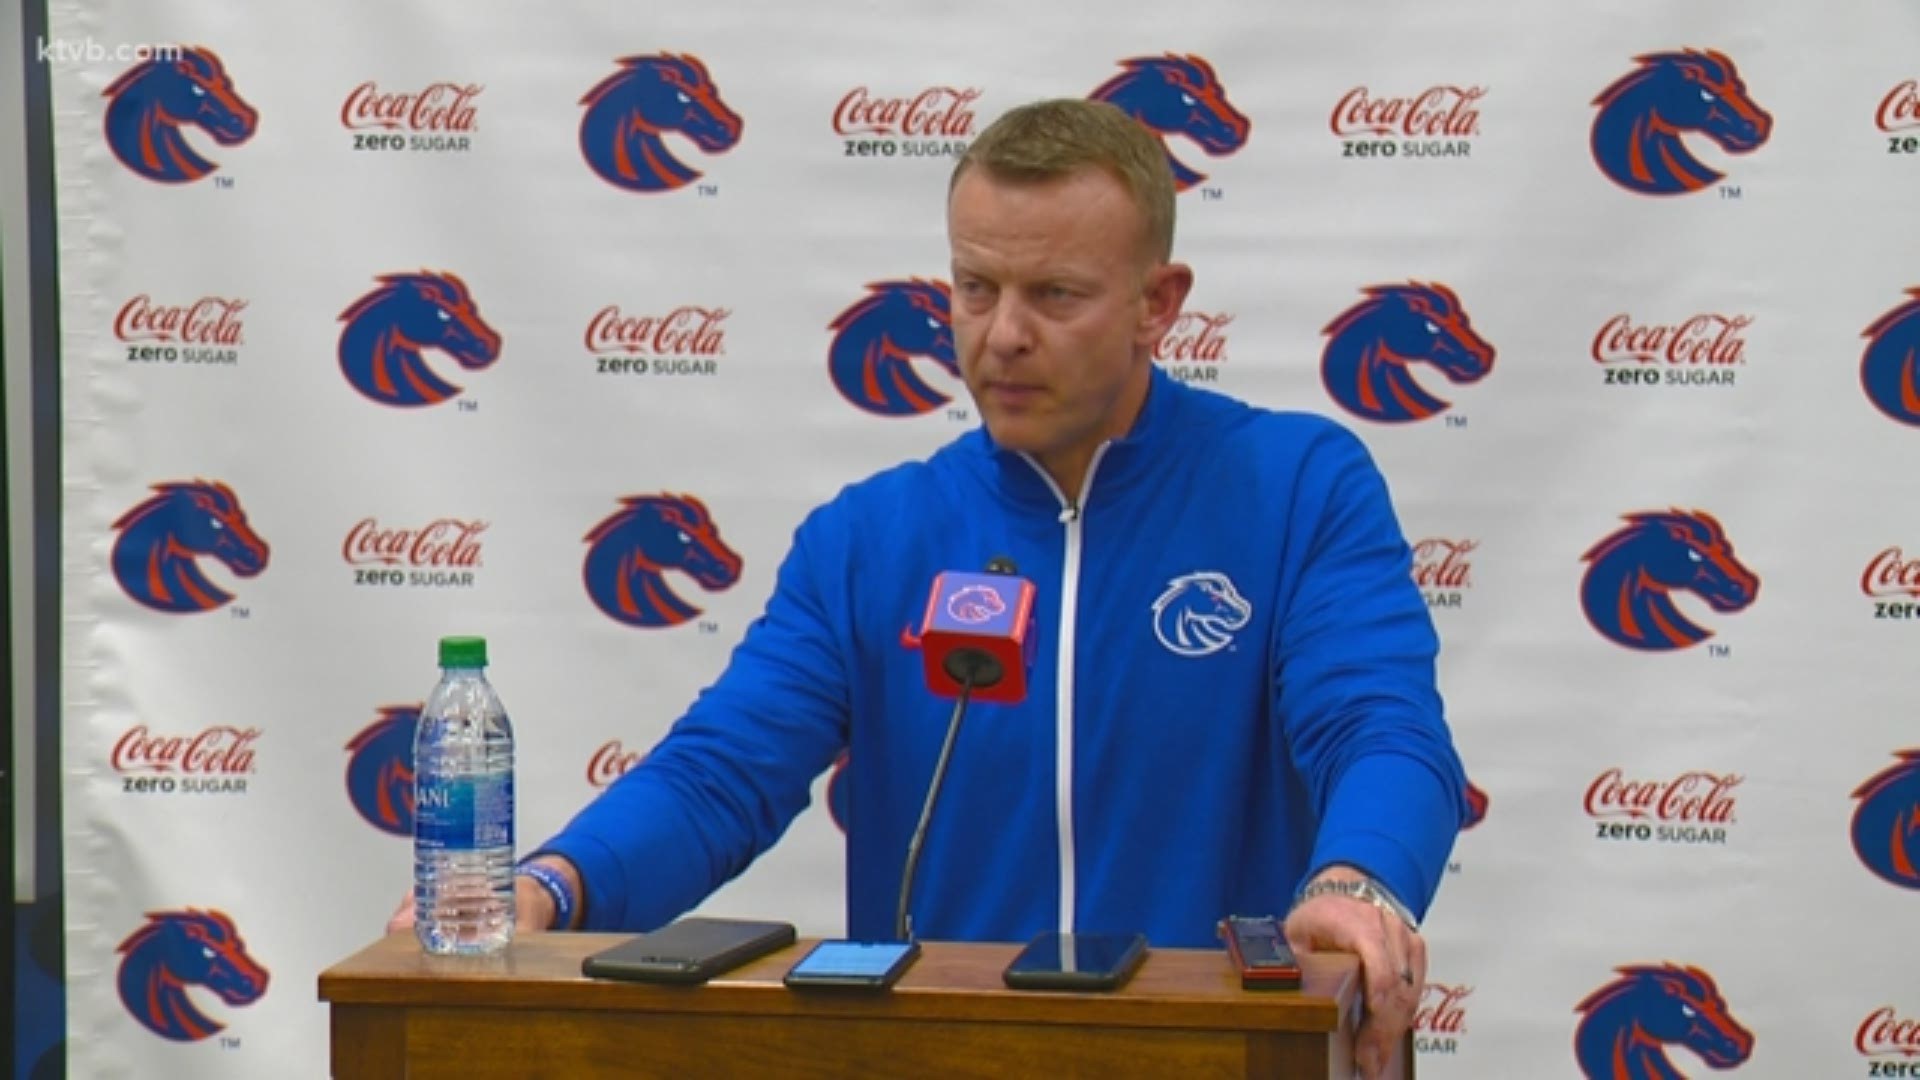 Harsin also explains how the Broncos' preparation is paying off with big plays in the last few games.